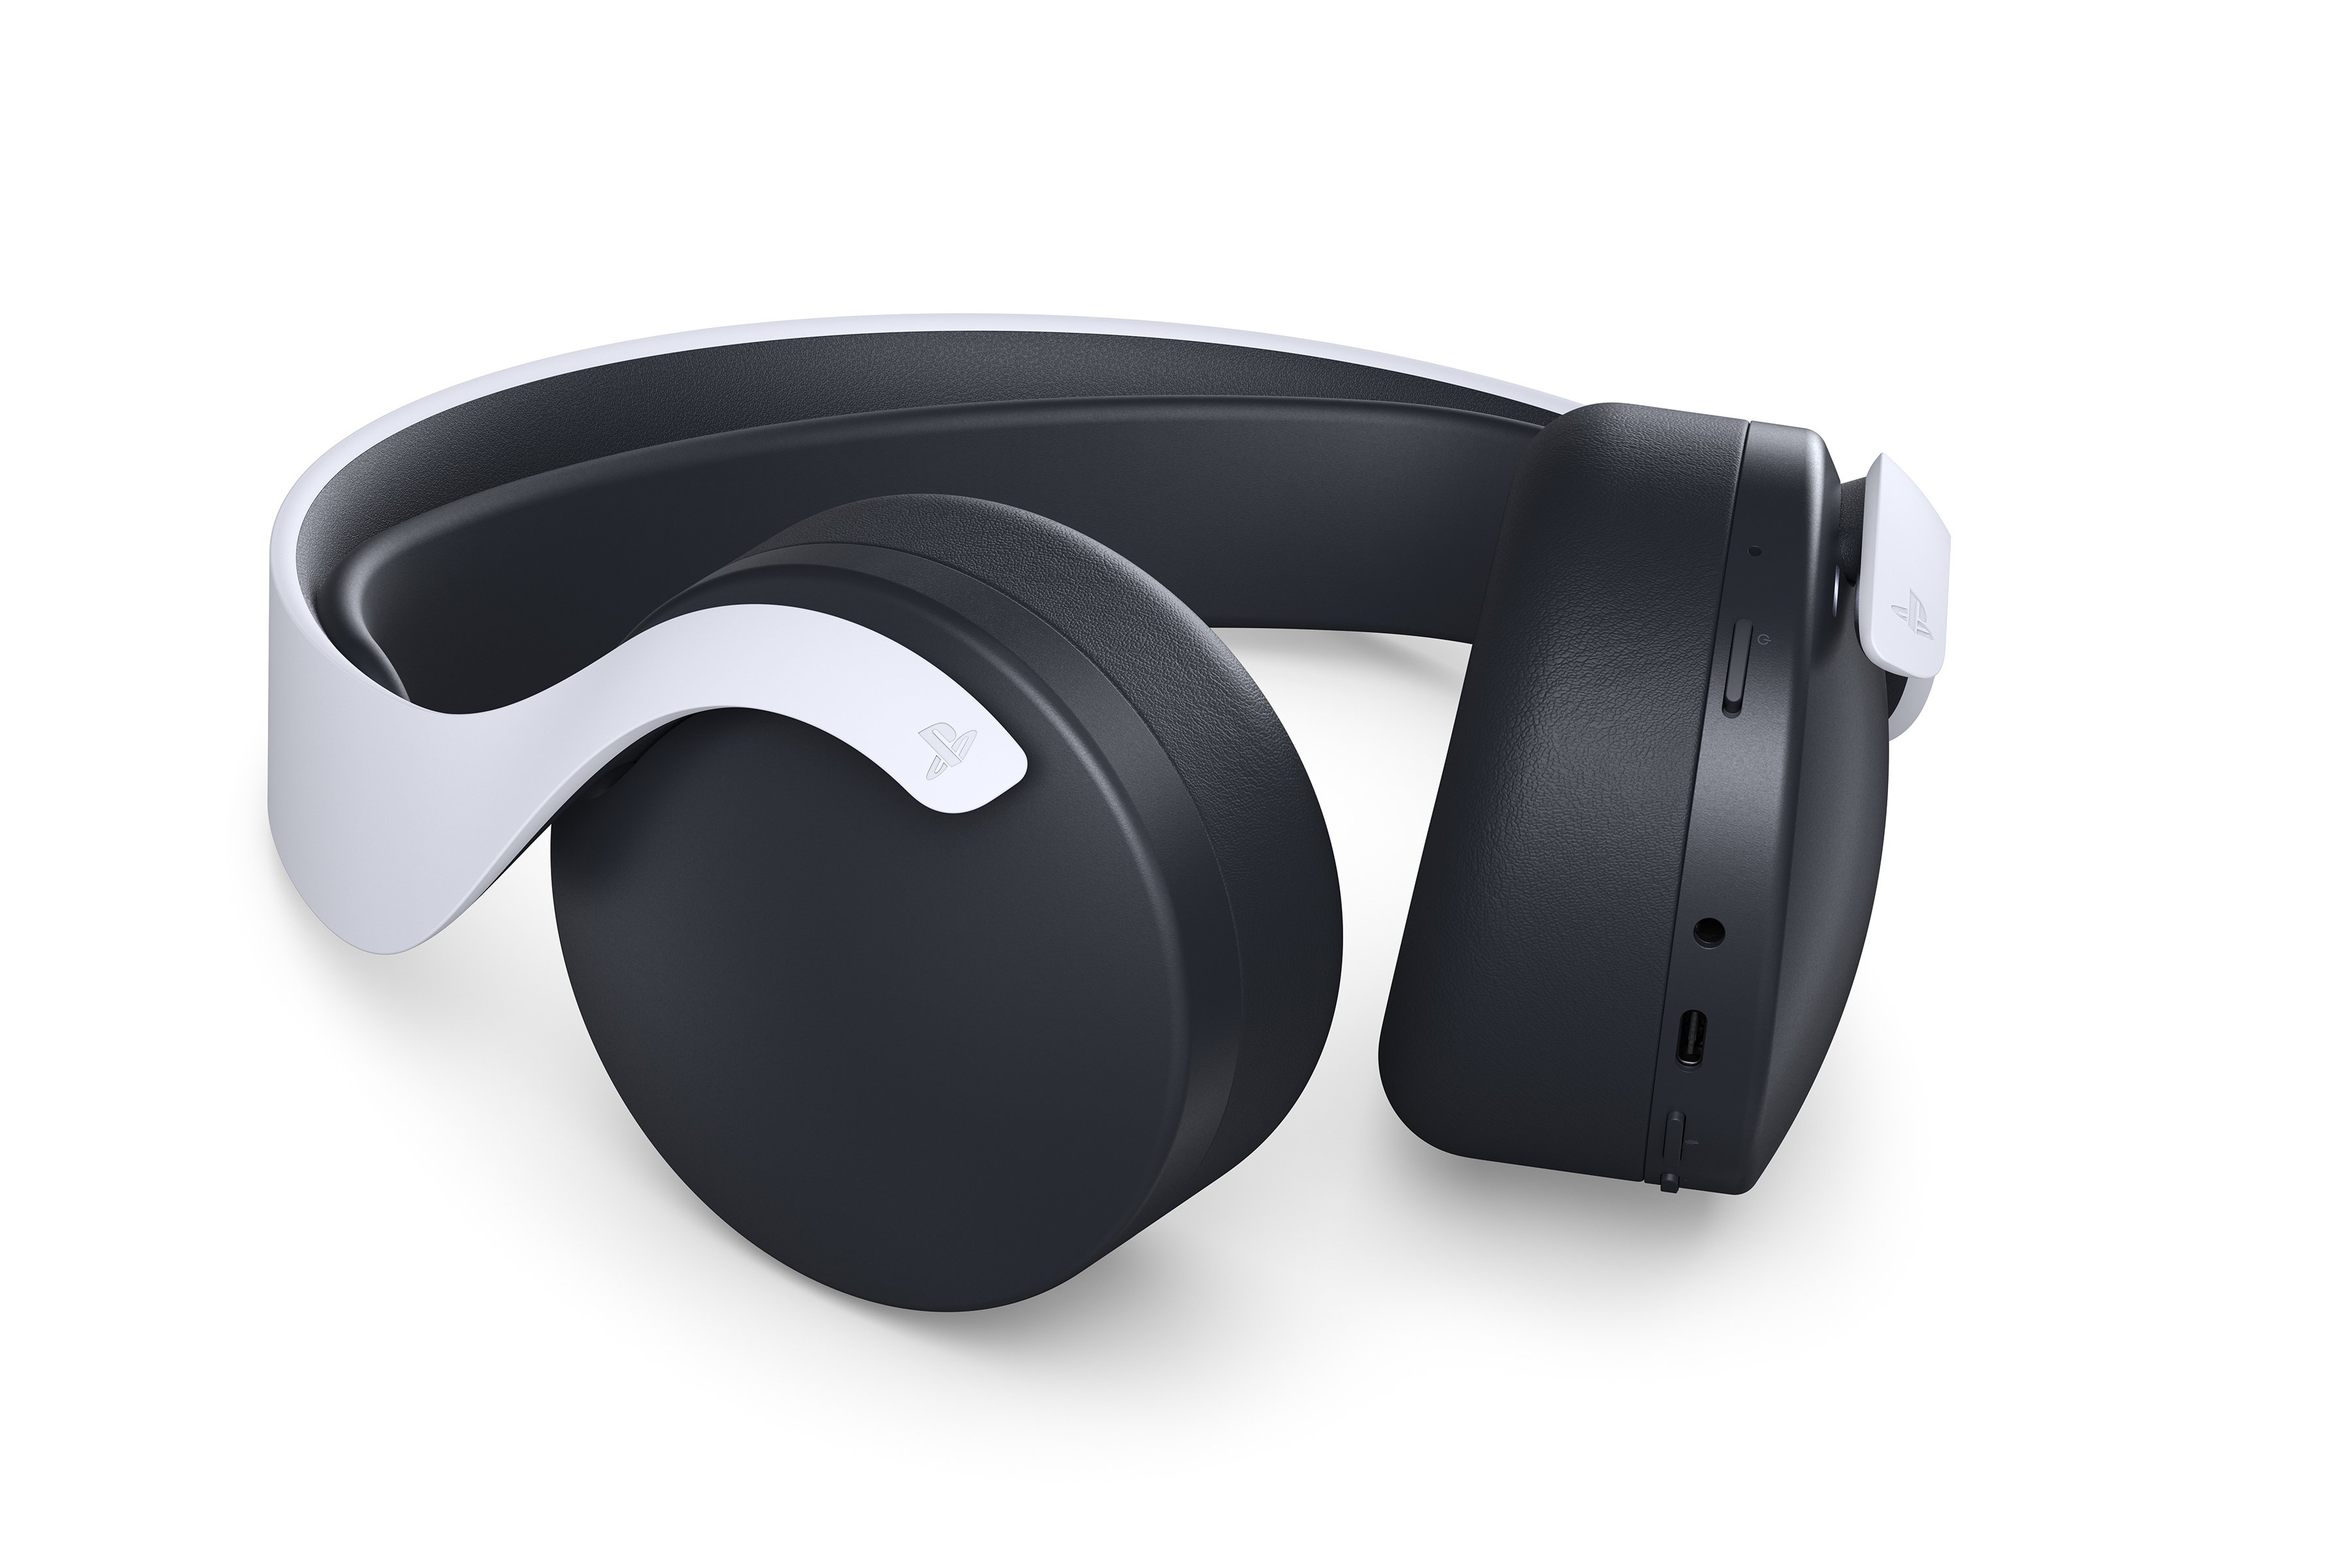 Hardware Review Ps5 Pulse 3d Wireless Headset A Sturdy All Rounder